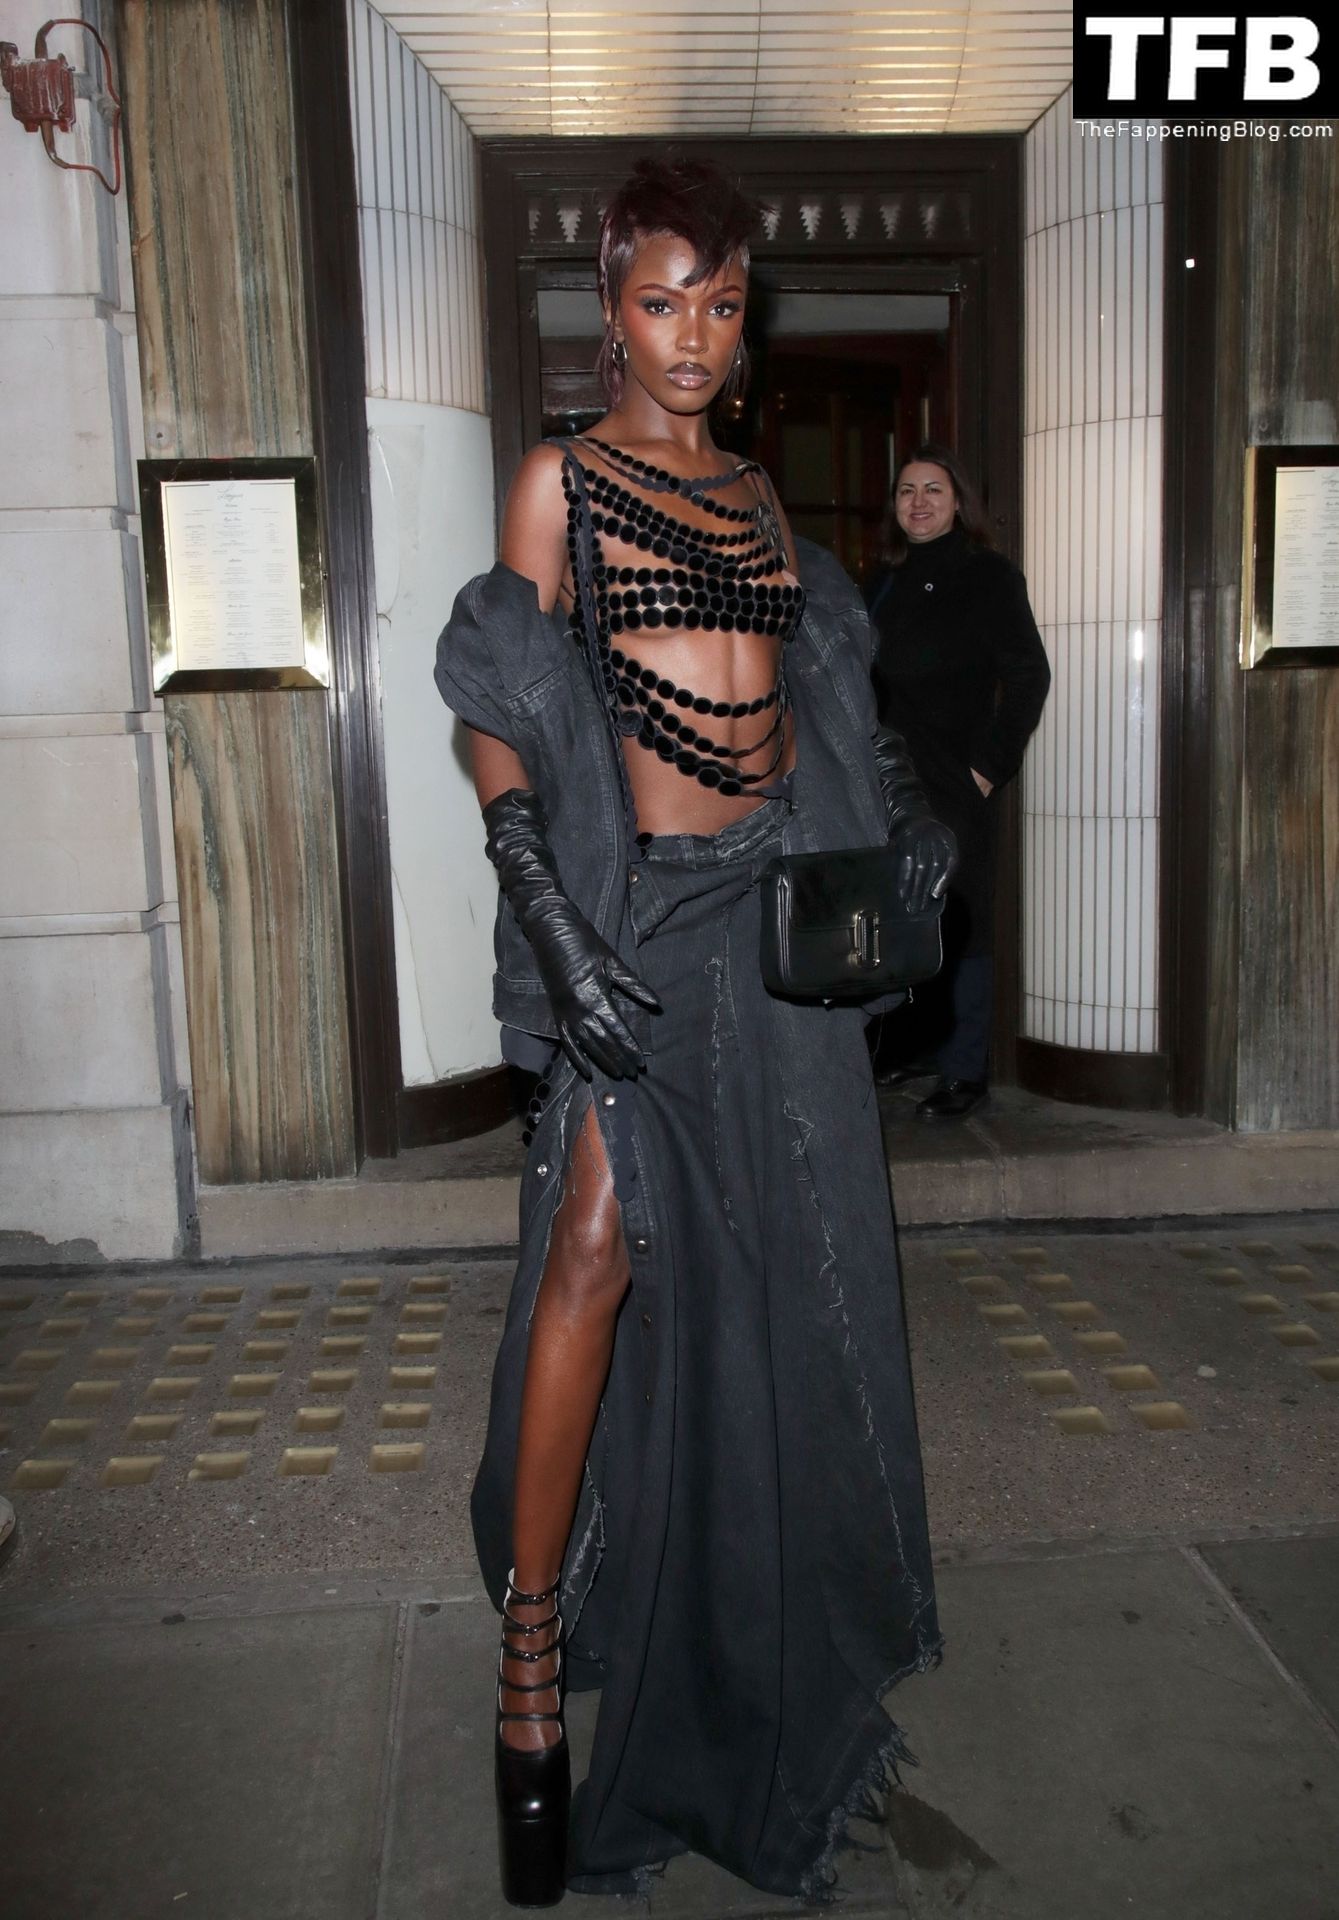 Leomie-Anderson-Sexy-The-Fappening-Blog-16.jpg